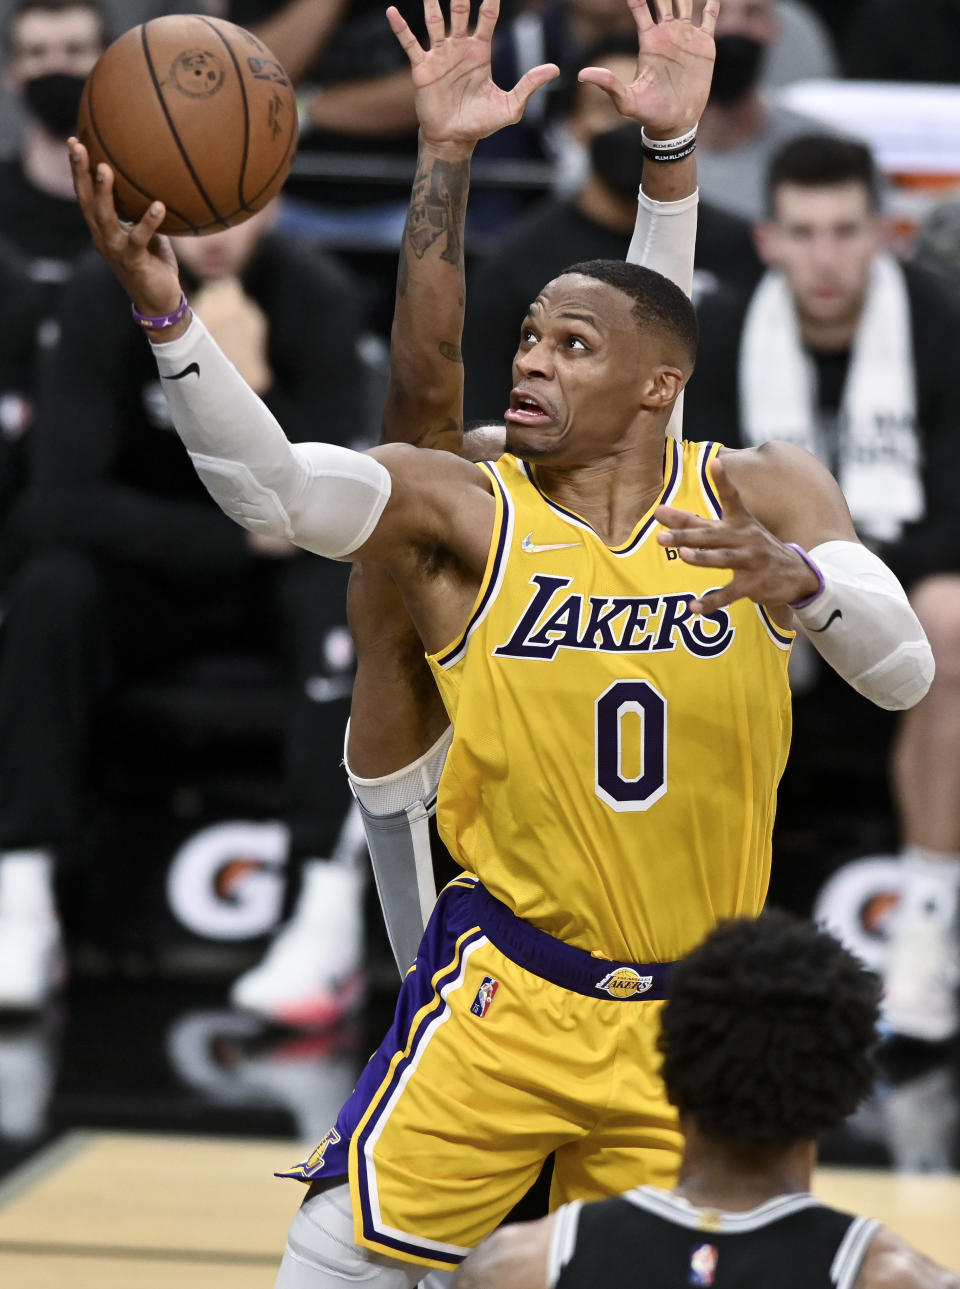 Los Angeles Lakers' Russell Westbrook shoots during the second half of an NBA basketball game against the San Antonio Spurs on Tuesday, Oct. 26, 2021, in San Antonio, Texas. Los Angeles won 125-121 in overtime. (AP Photo/Darren Abate)